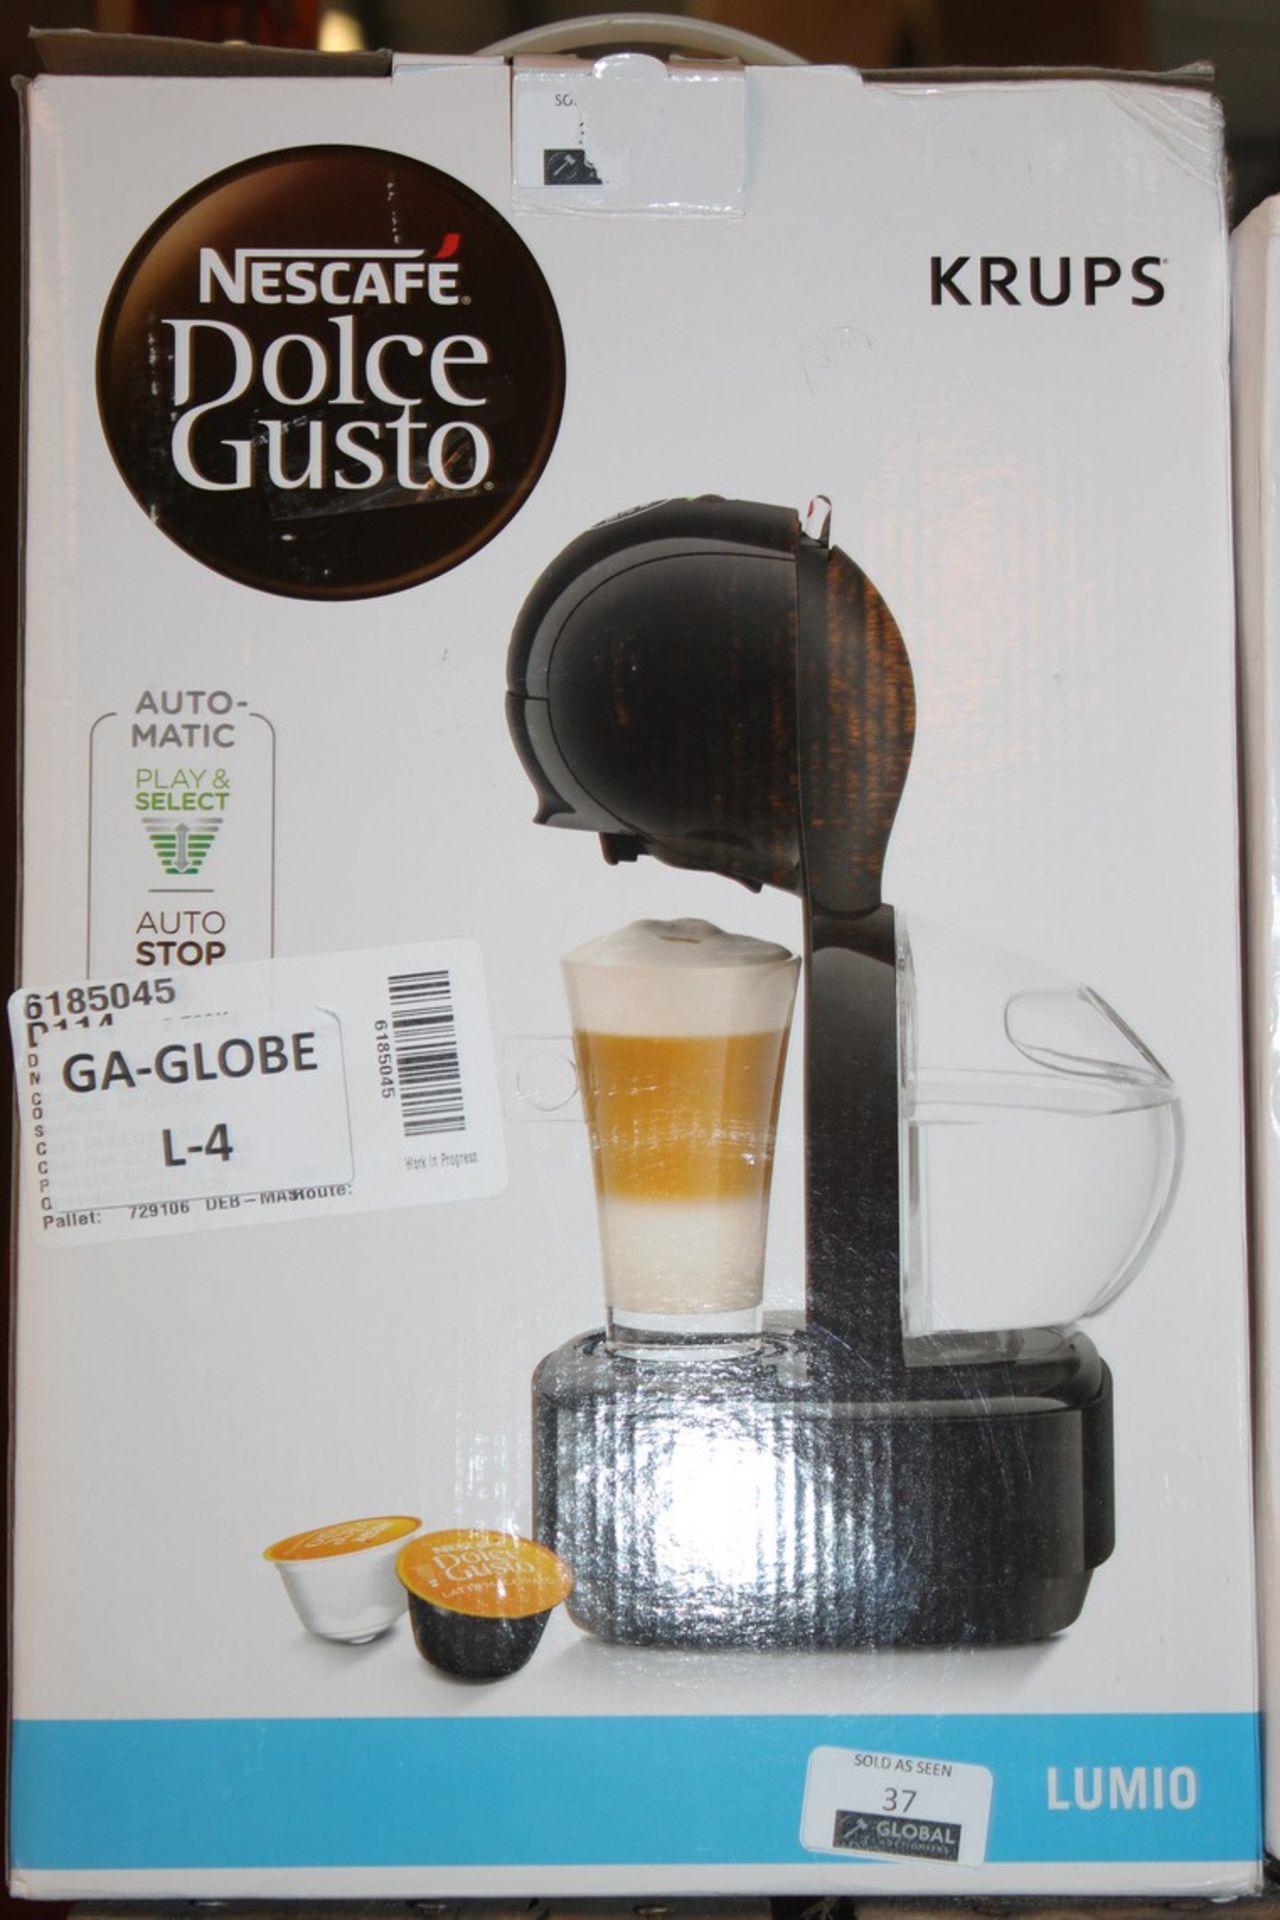 Boxed Krup Nescafe Dolce Gusto Coffee Maker RRP £6